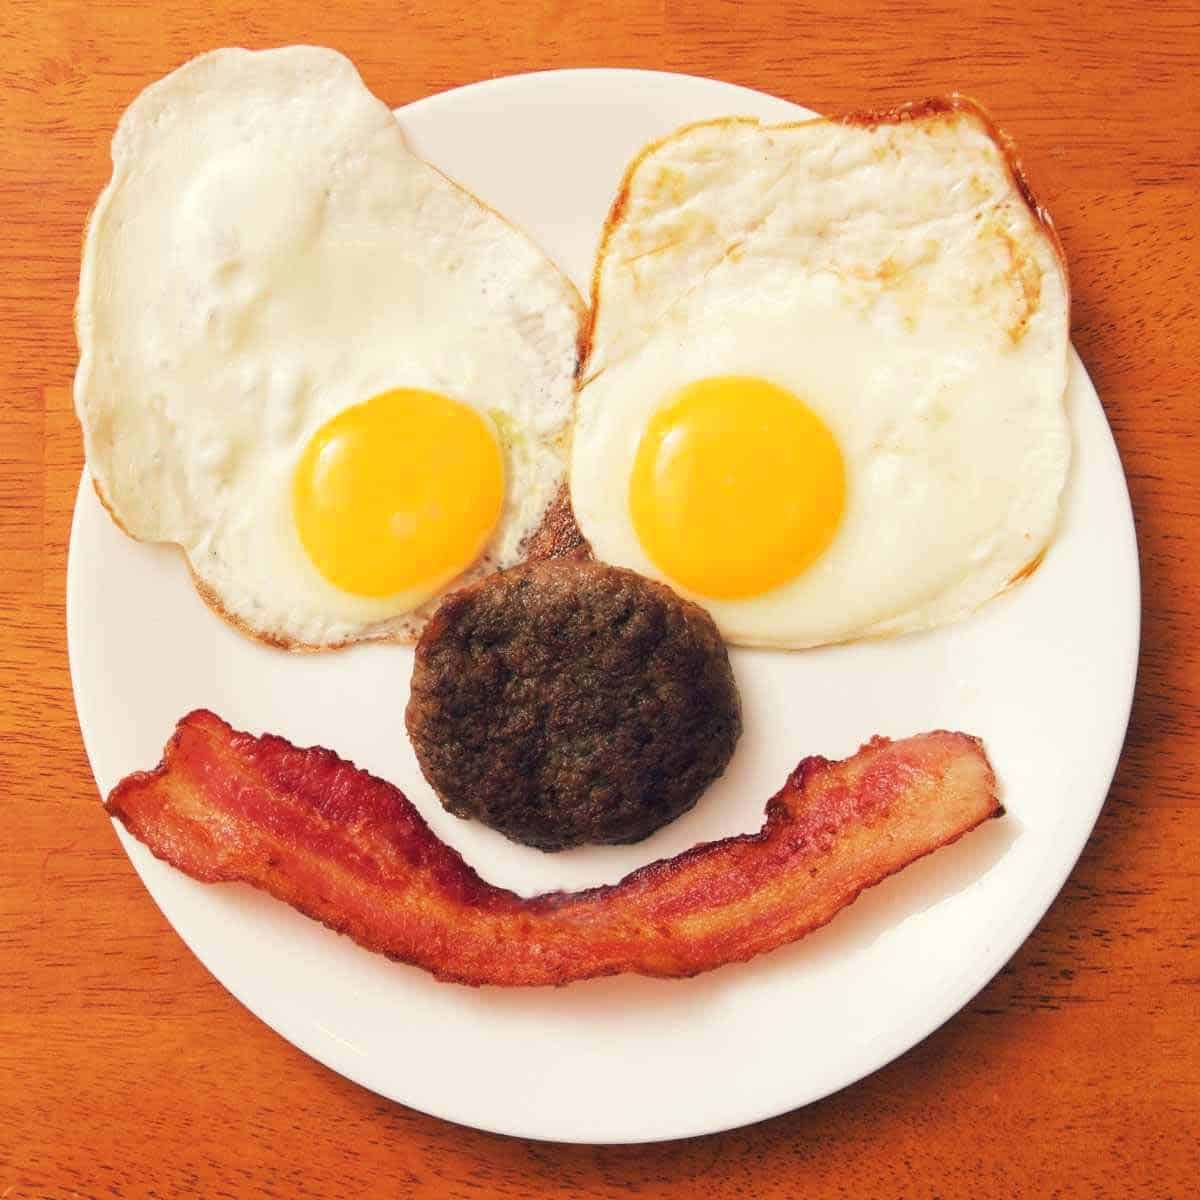 Two fried eggs, a round piece of fried sausage, and a strip of fried bacon arranged on a plate like a smiling face.